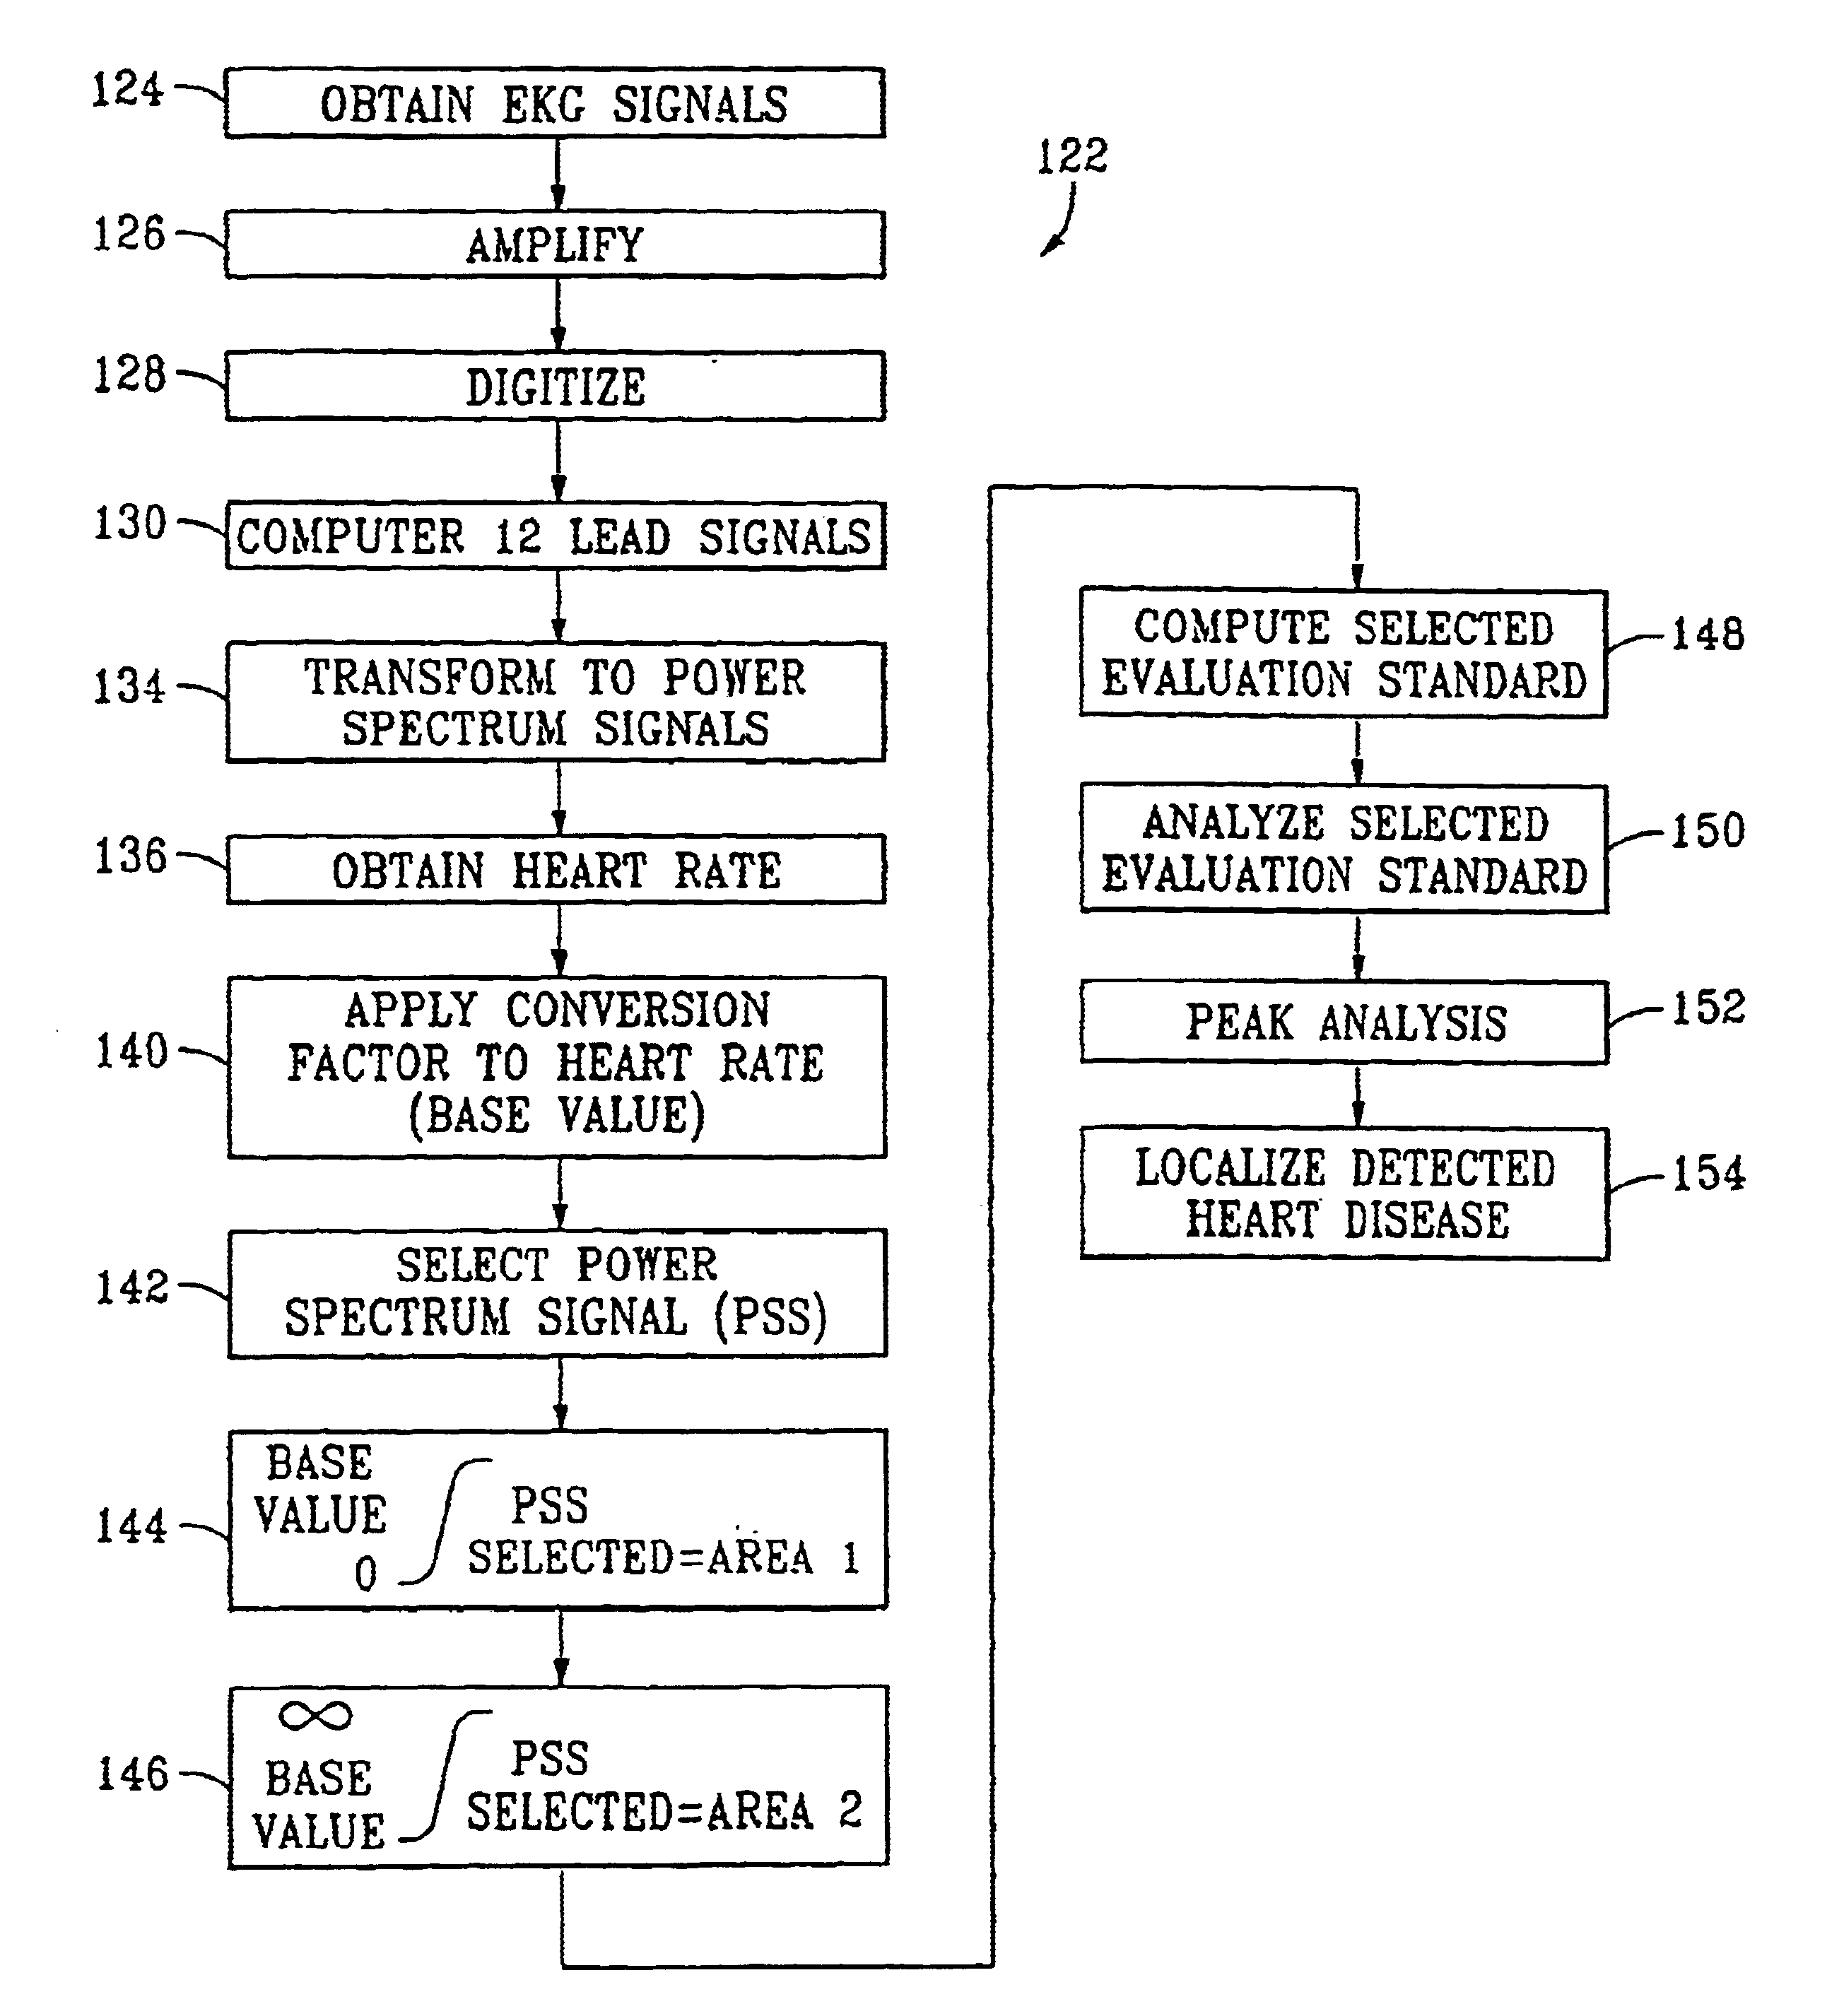 System and method for detecting and locating heart disease